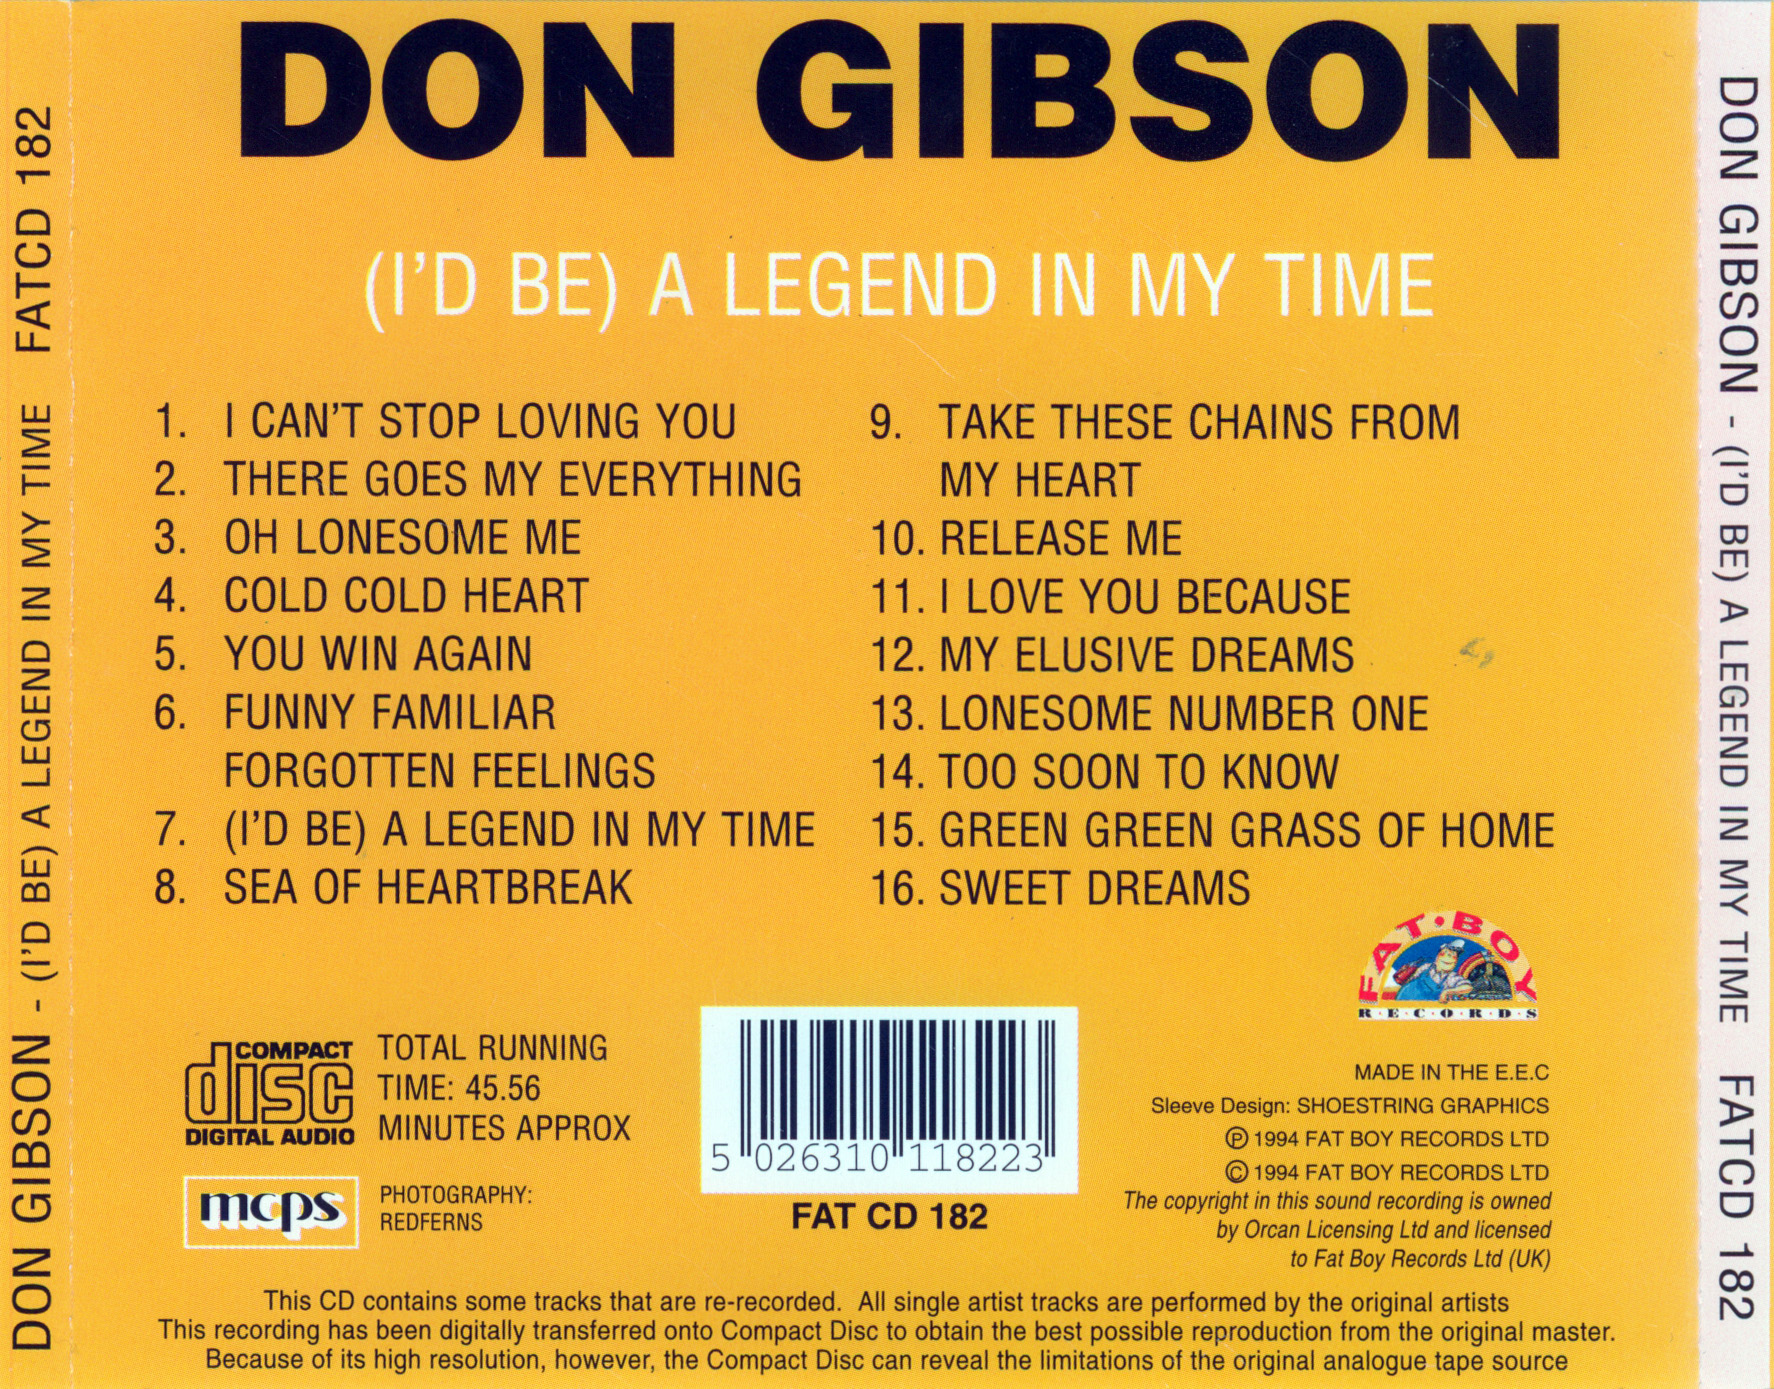 tyran Arrowhead erhvervsdrivende Release “(I'd Be) A Legend in My Time” by Don Gibson - Cover Art -  MusicBrainz